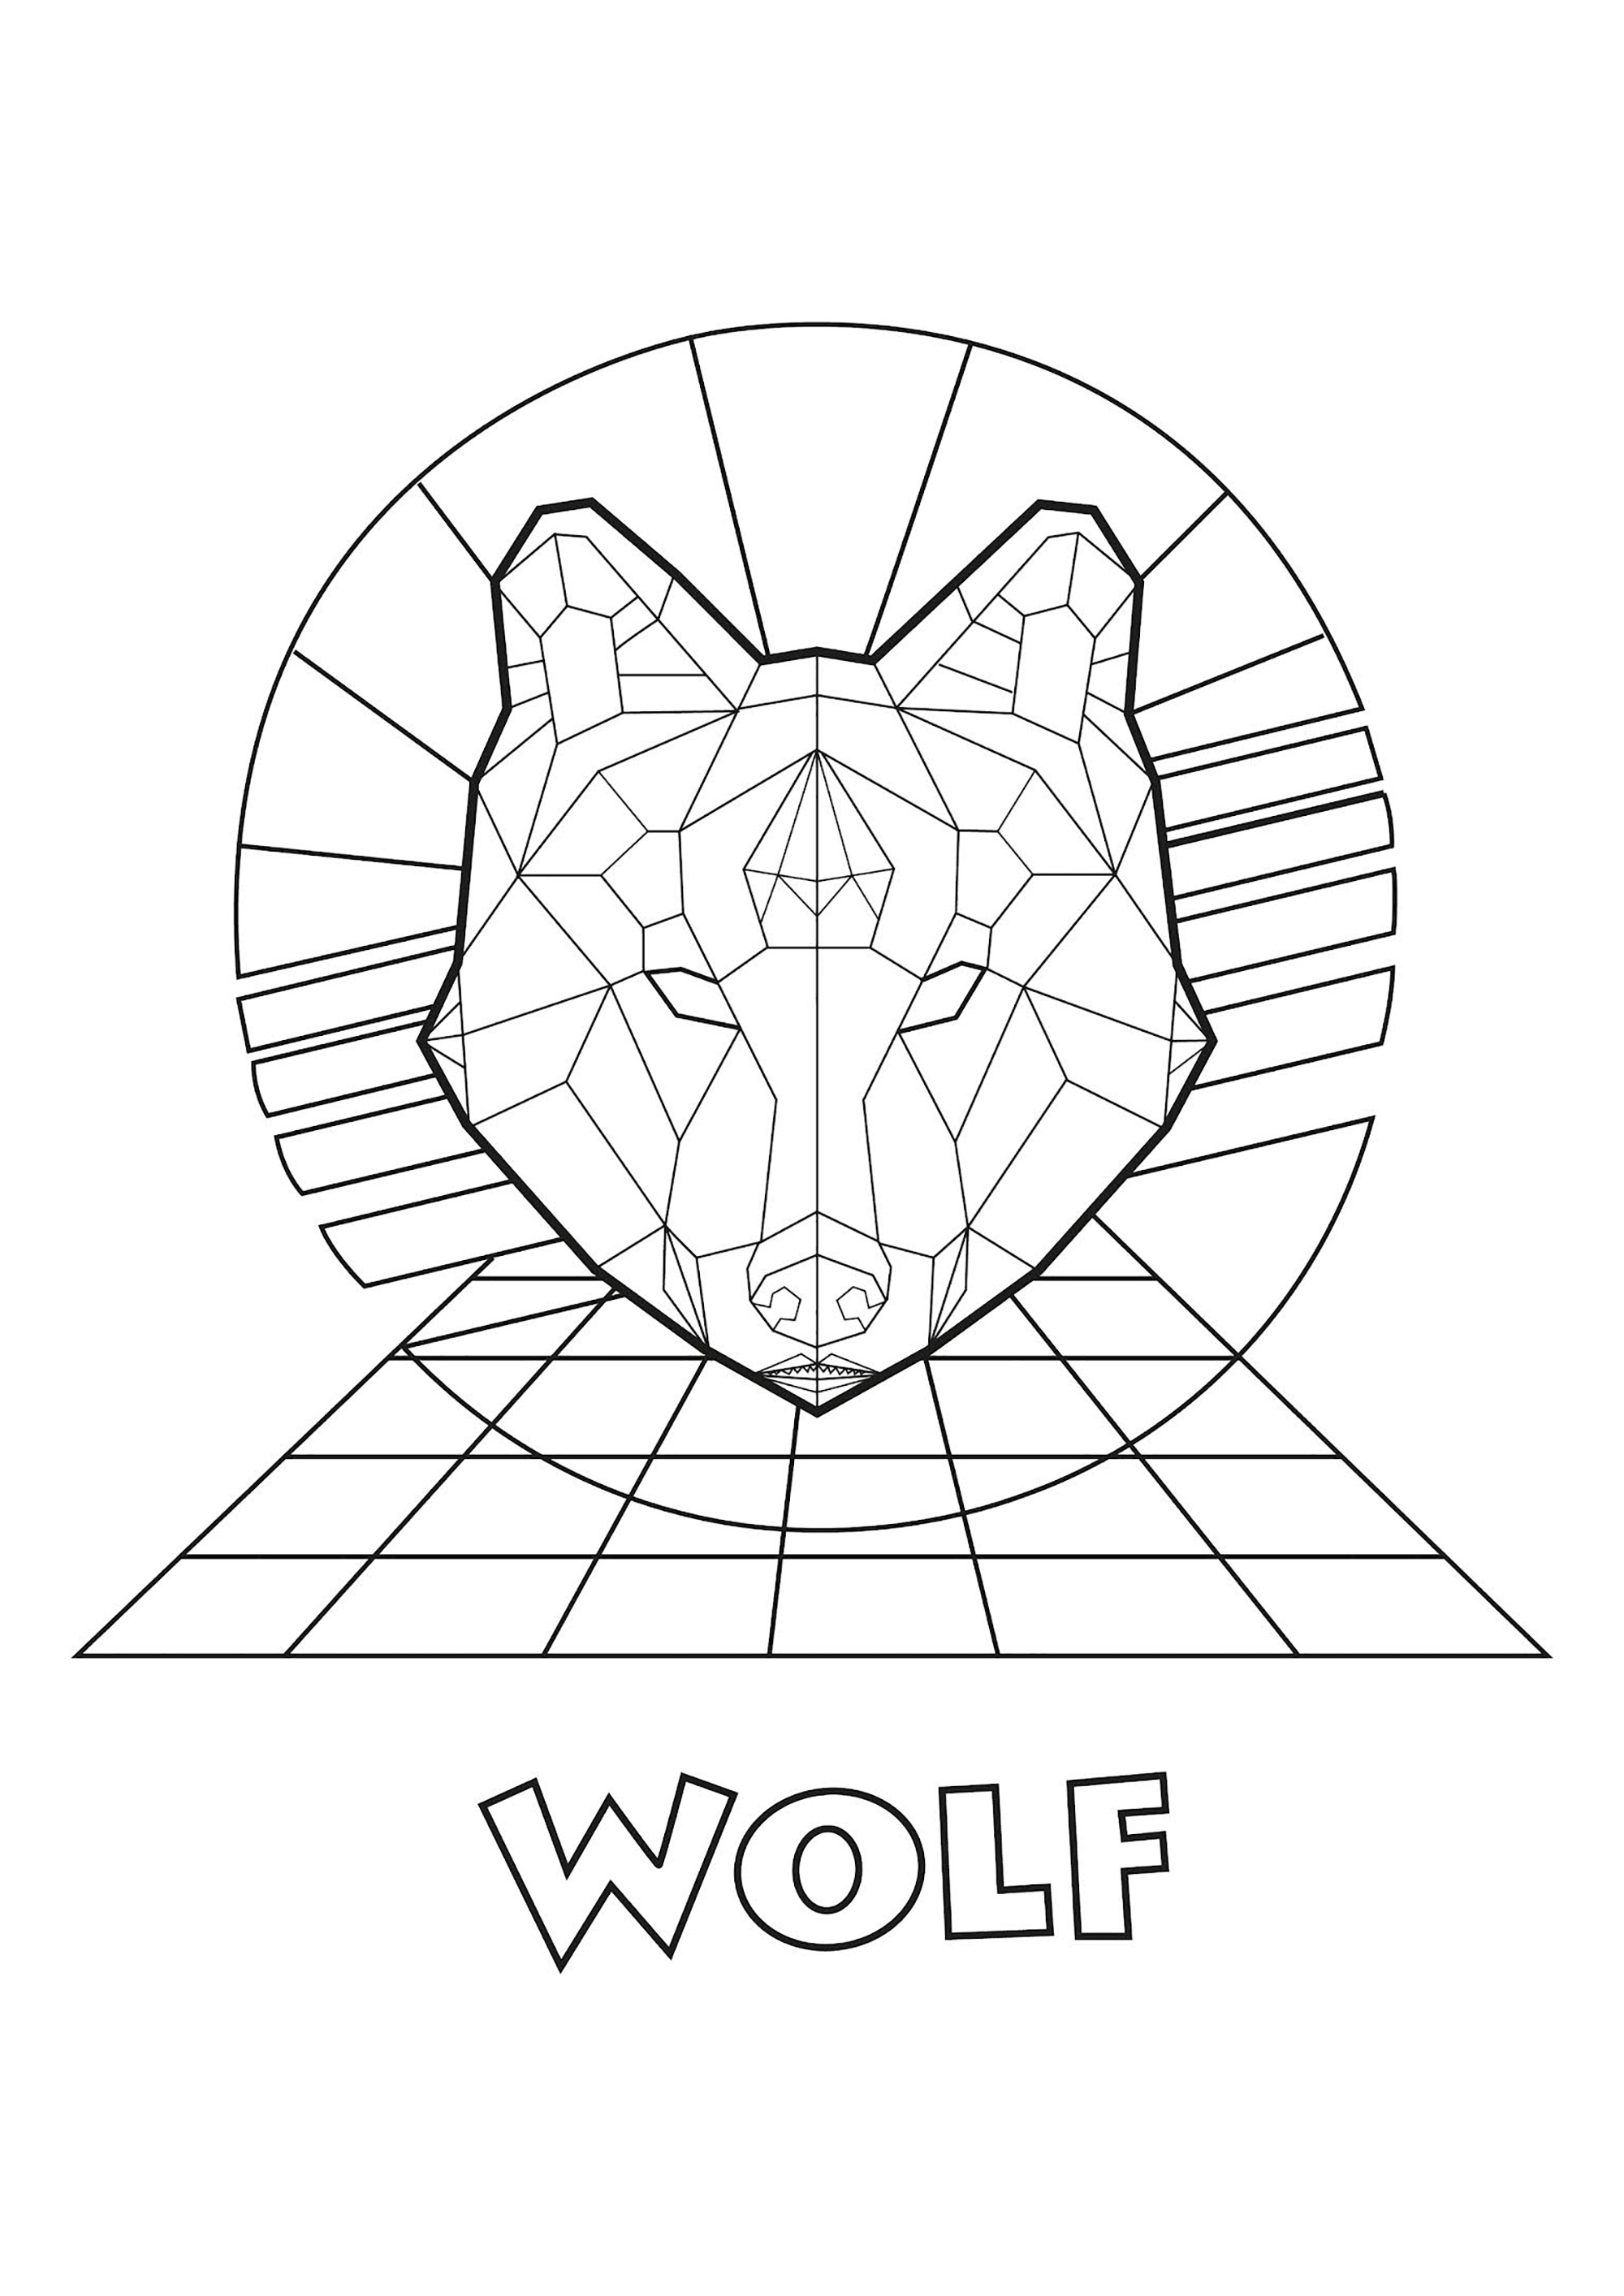 Wolf head created with straight lines, with geometric background